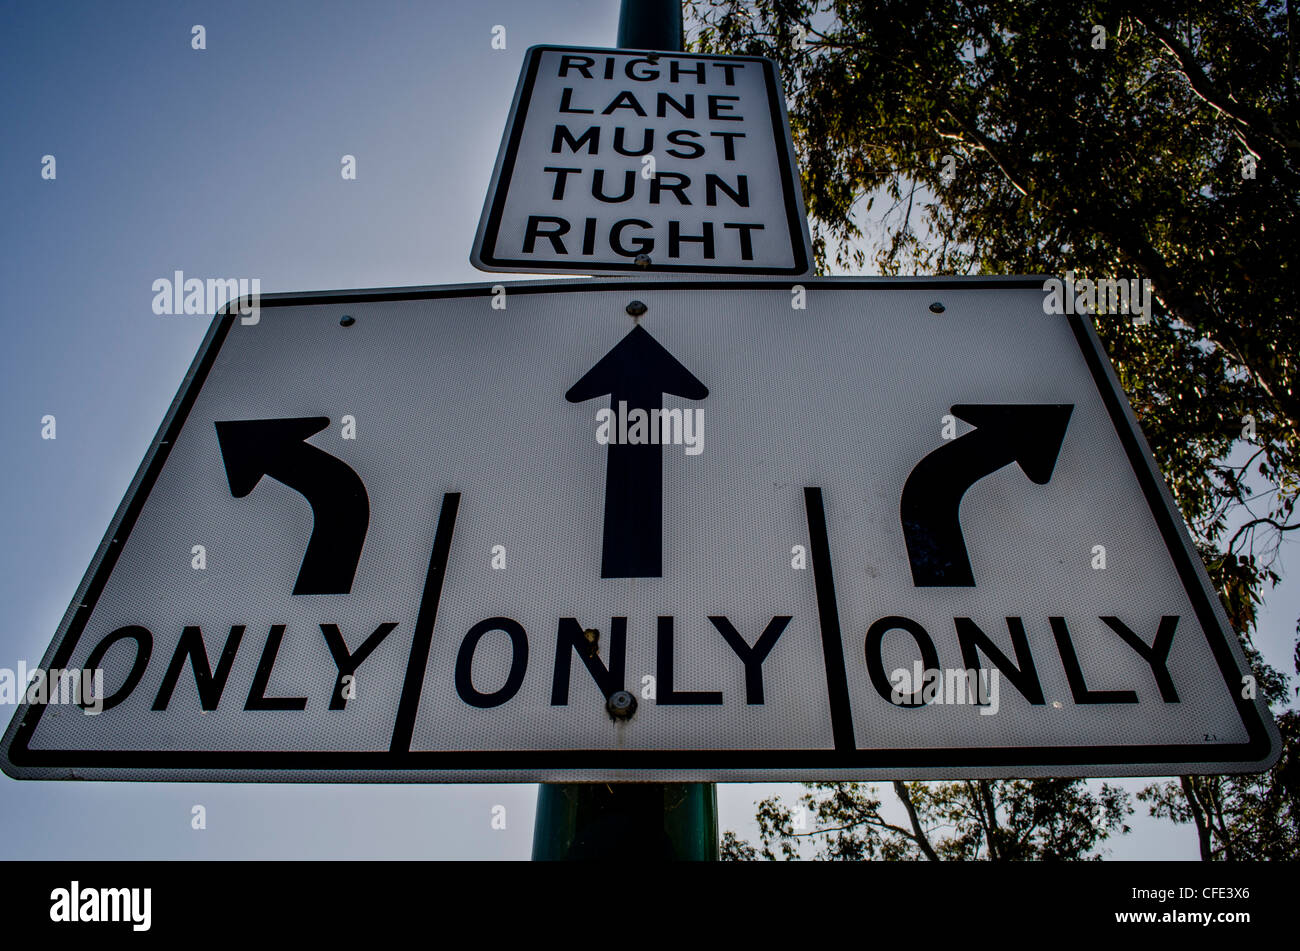 Road sign right lane must turn right. Stock Photo